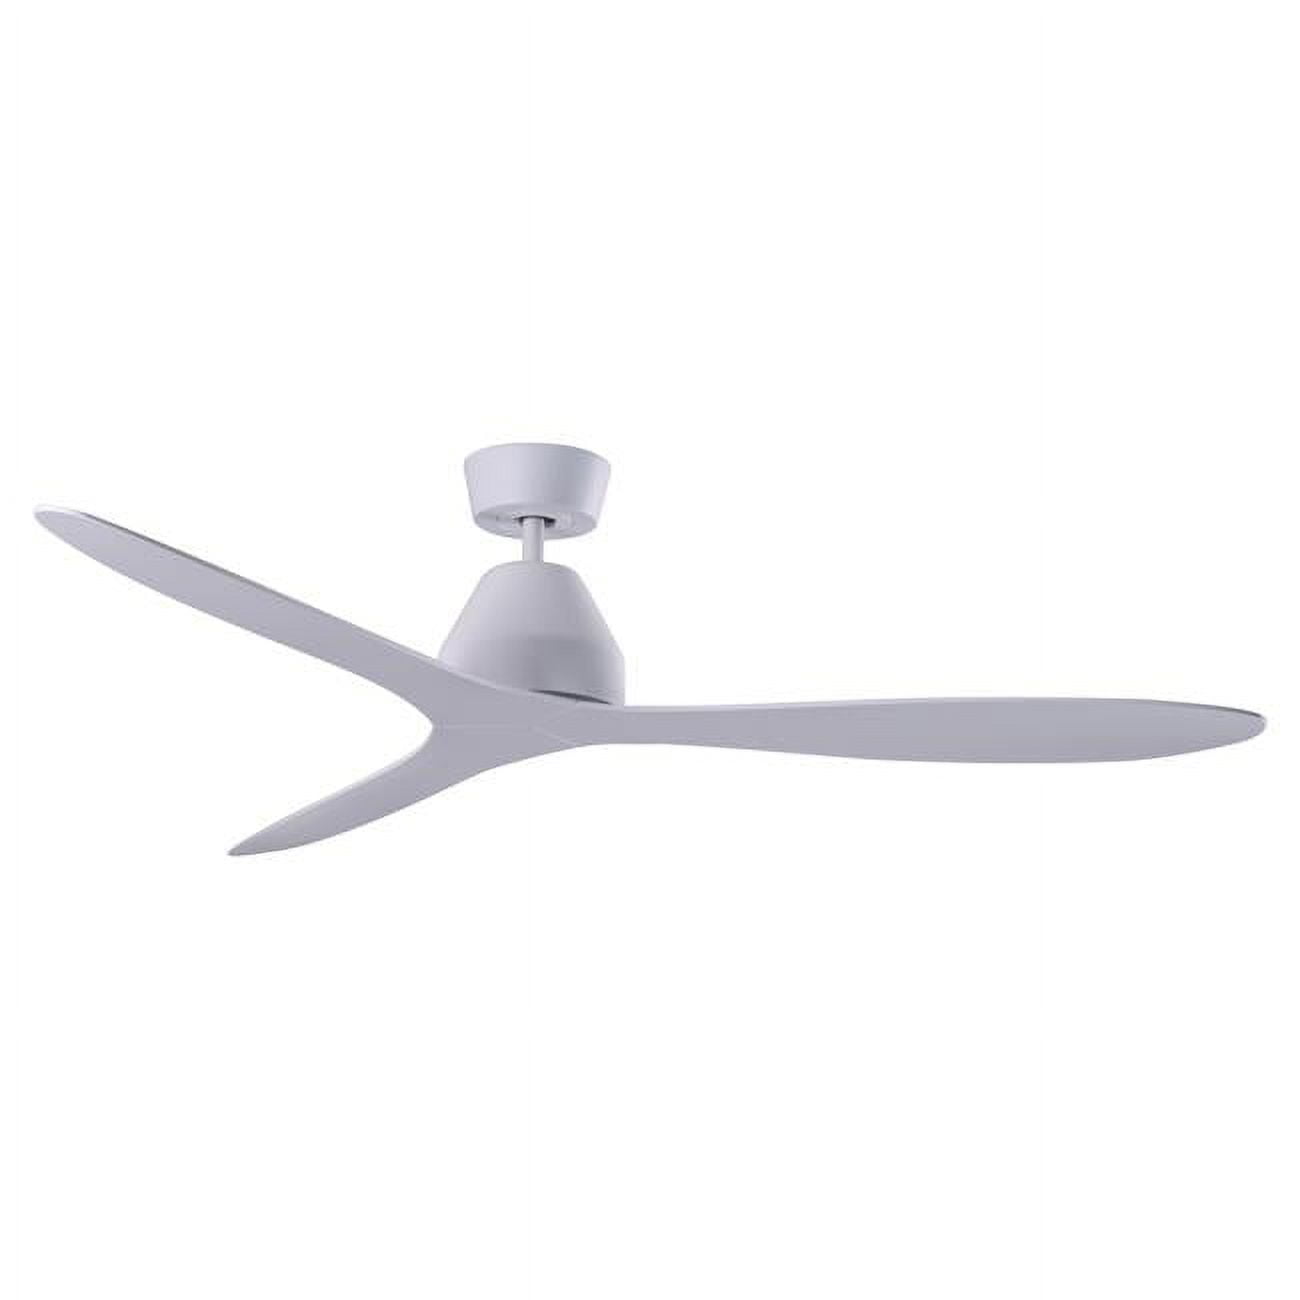 Picture of Lucci Air 21304001 Lucci Air Whitehaven 56-inch White Ceiling Fan